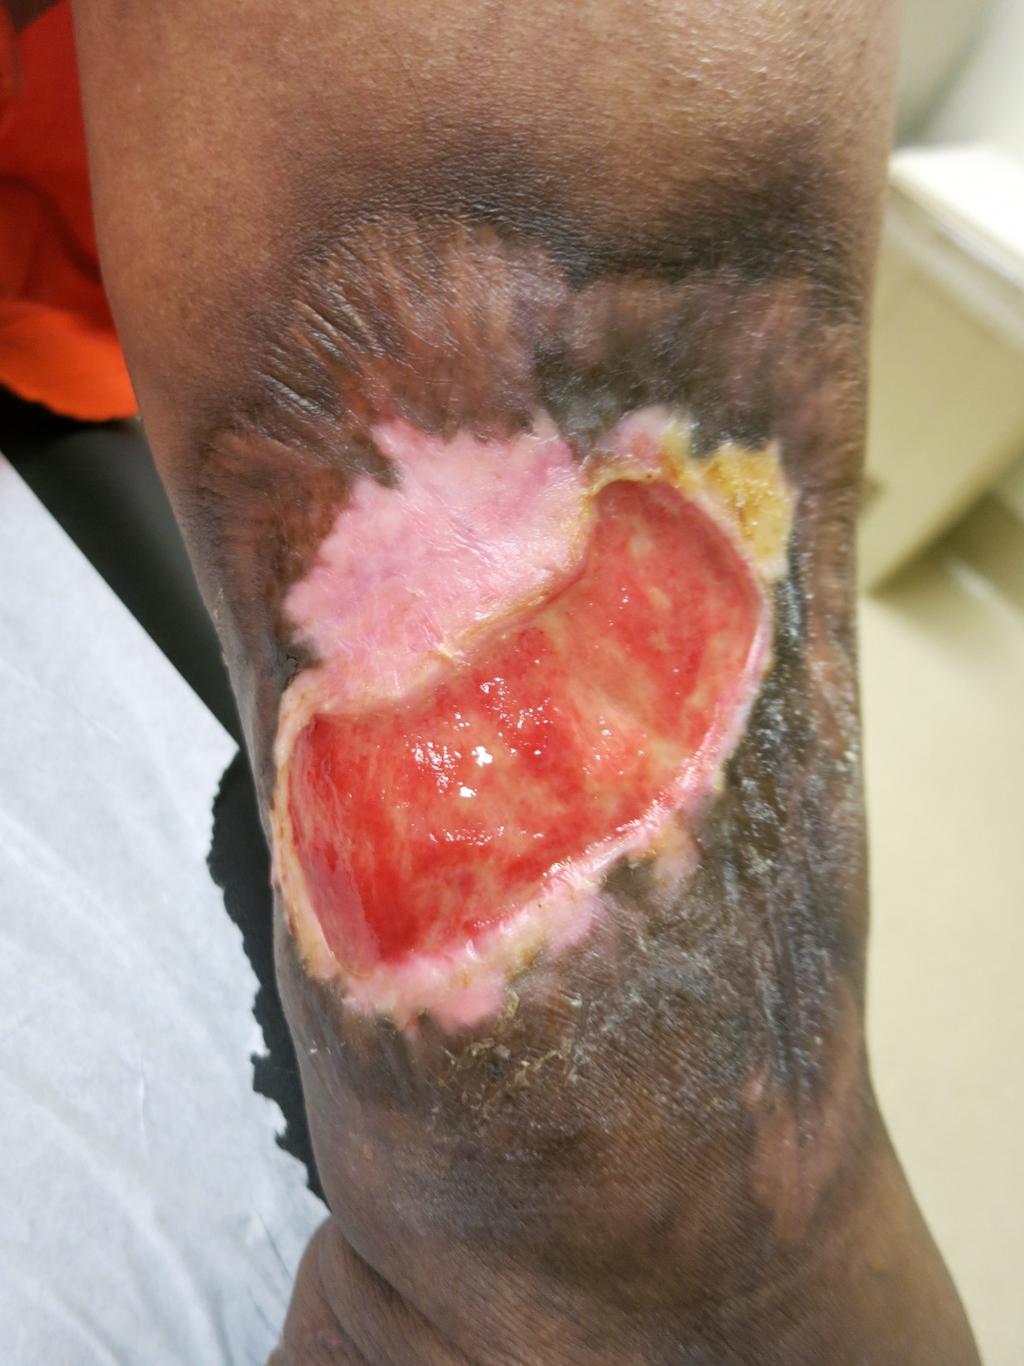 Case Example 50yo woman with pyoderma gangrenosum x 3 years Also high-titer ANA and antiphospholipid antibody positivity Has asked for pain medicine in